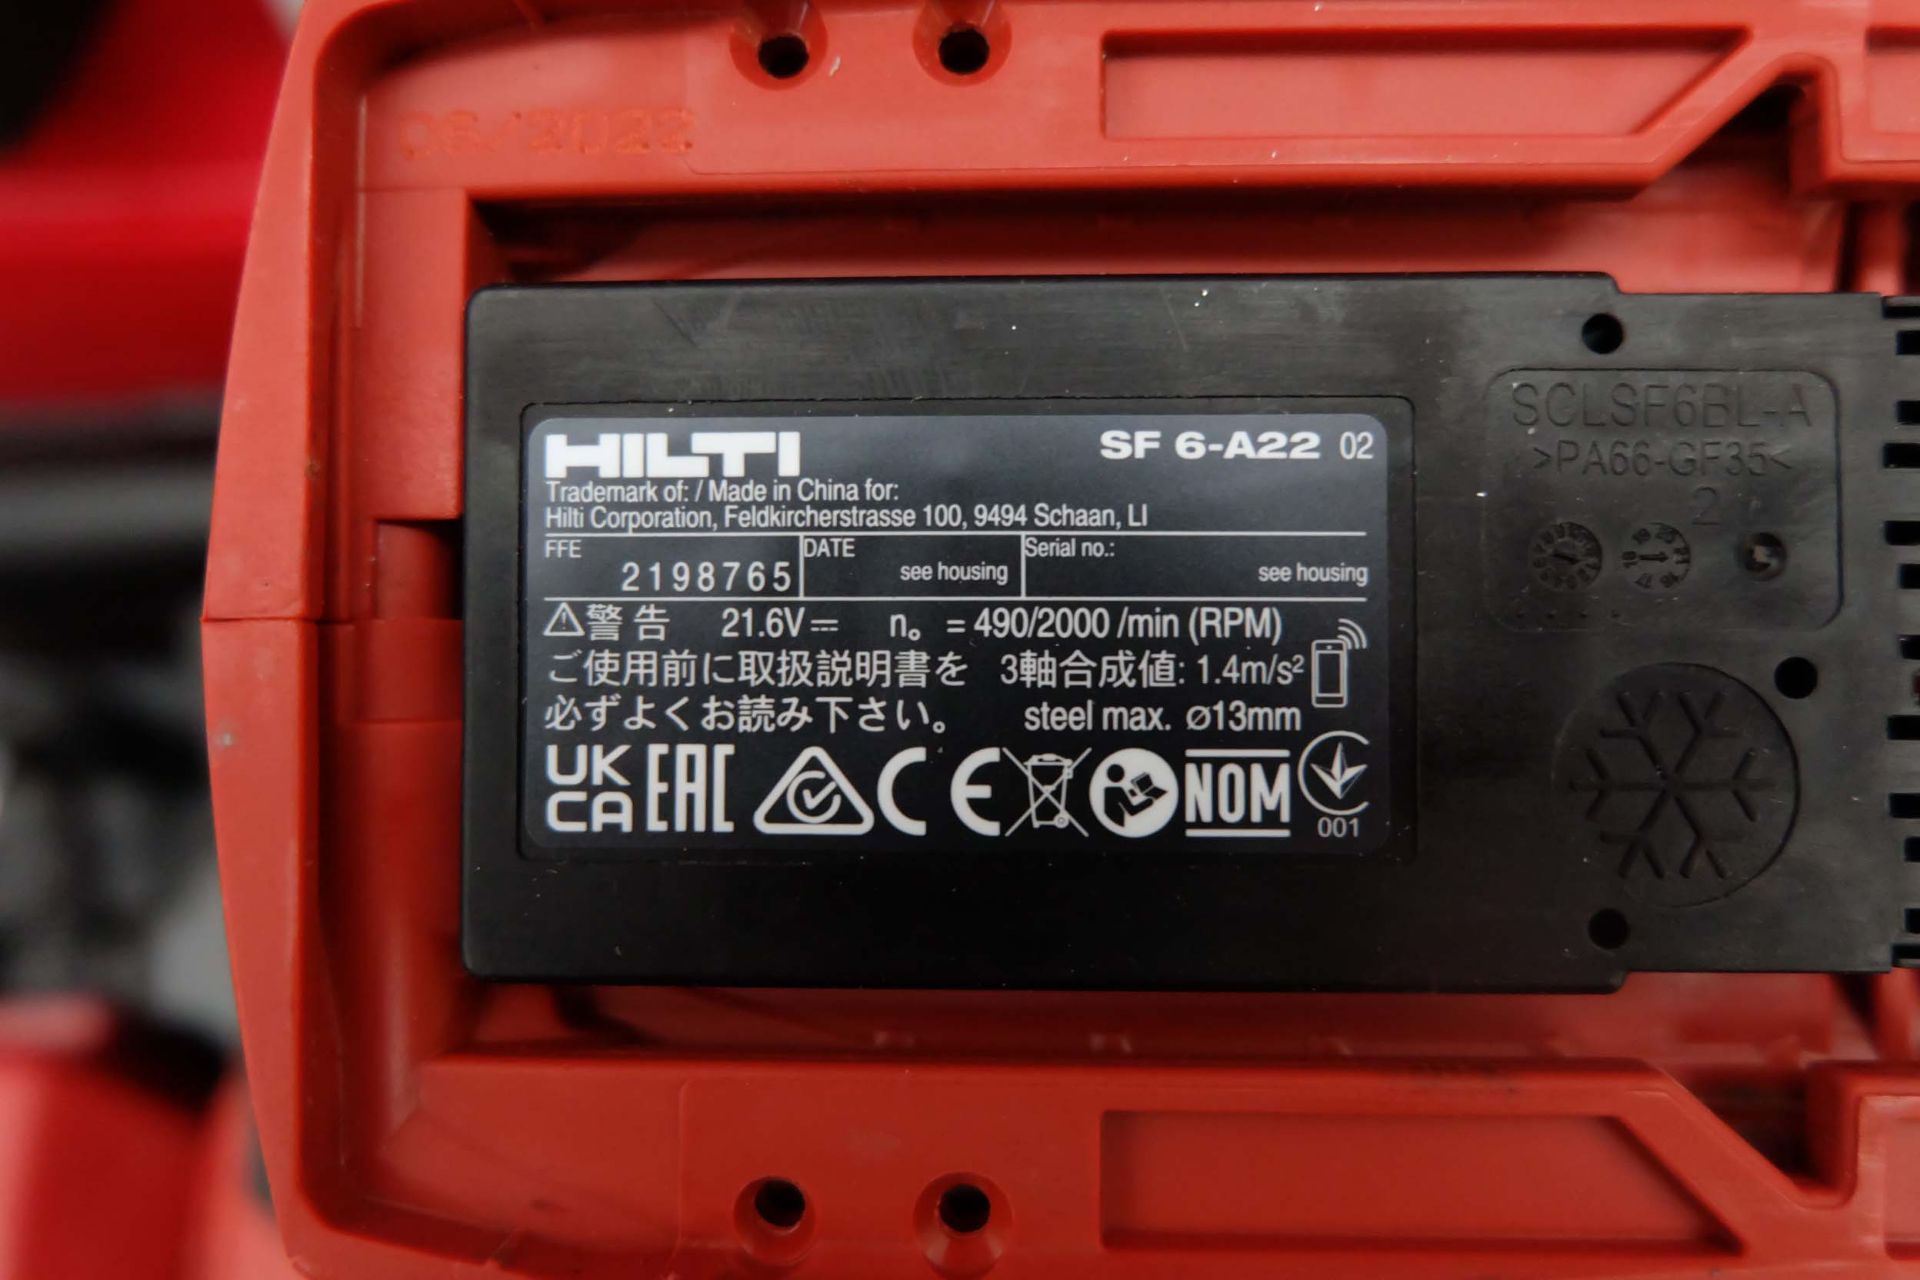 Hilti Model SF 6-A22 Cordless Power Drill. 2 x 22V 5.2Ah Batteries. 240V Charger. - Image 6 of 8